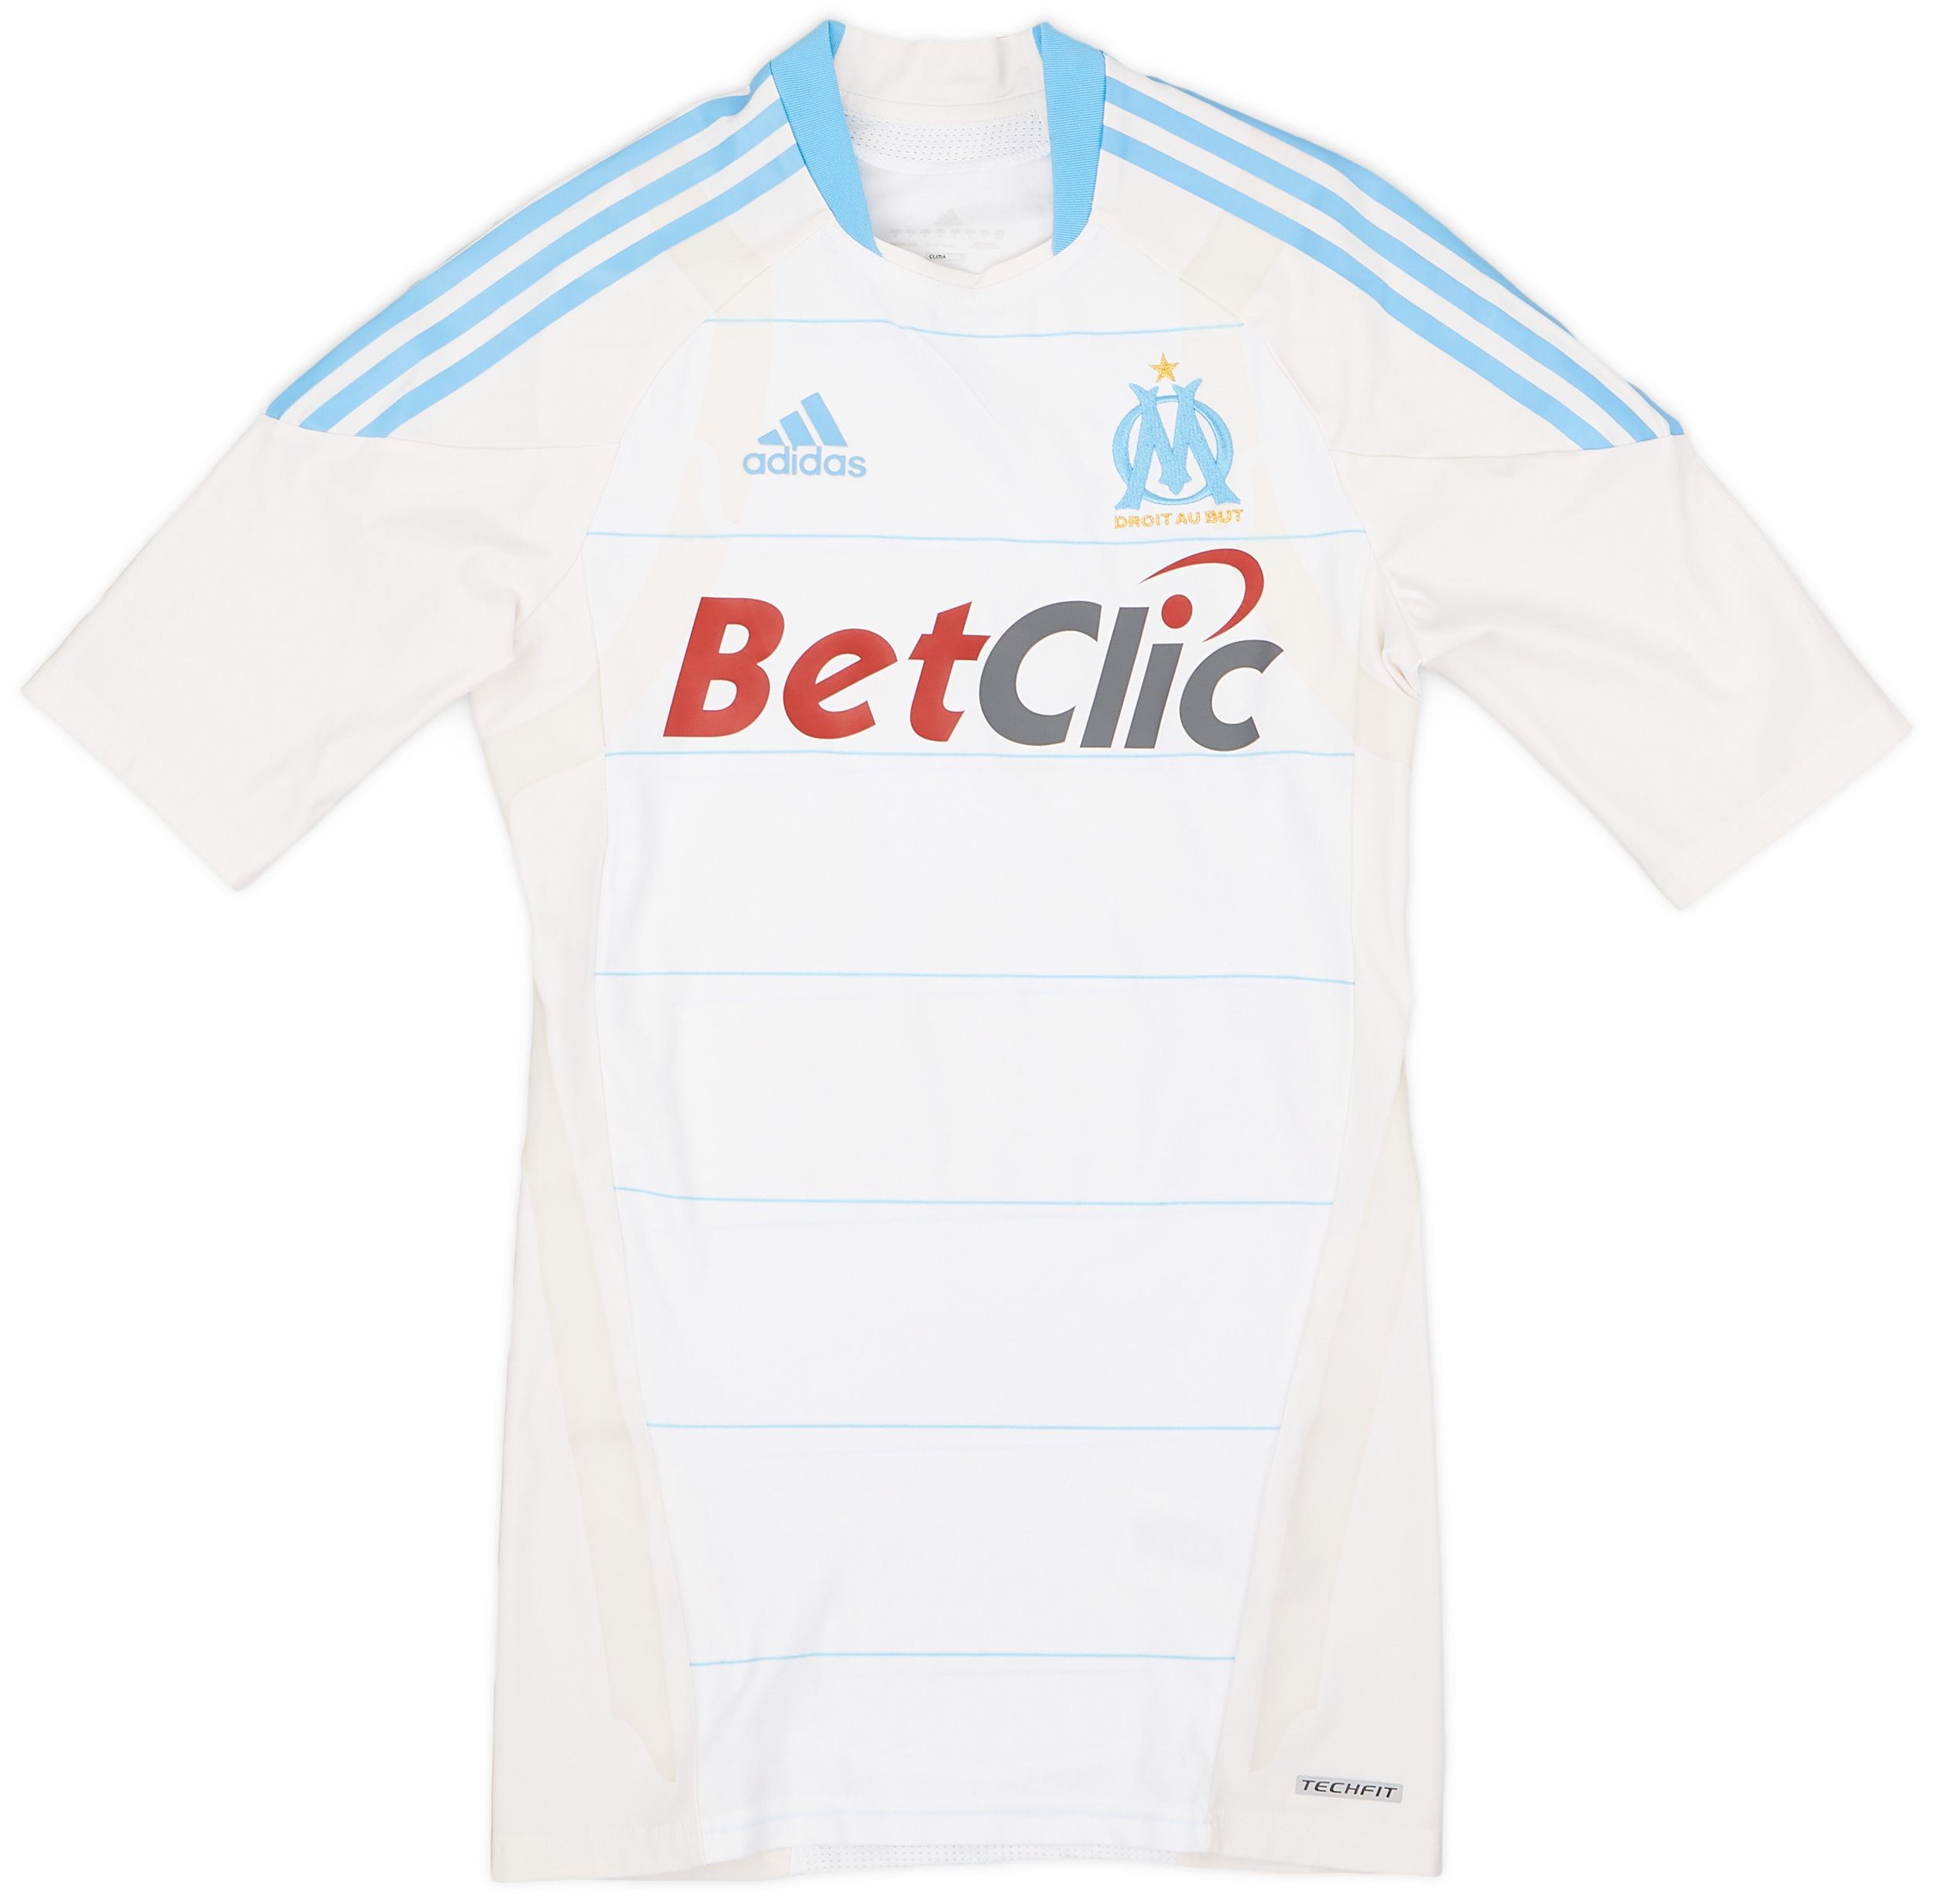 2010-11 Olympique Marseille Player Issue TechFit Home Shirt - 9/10 - ()